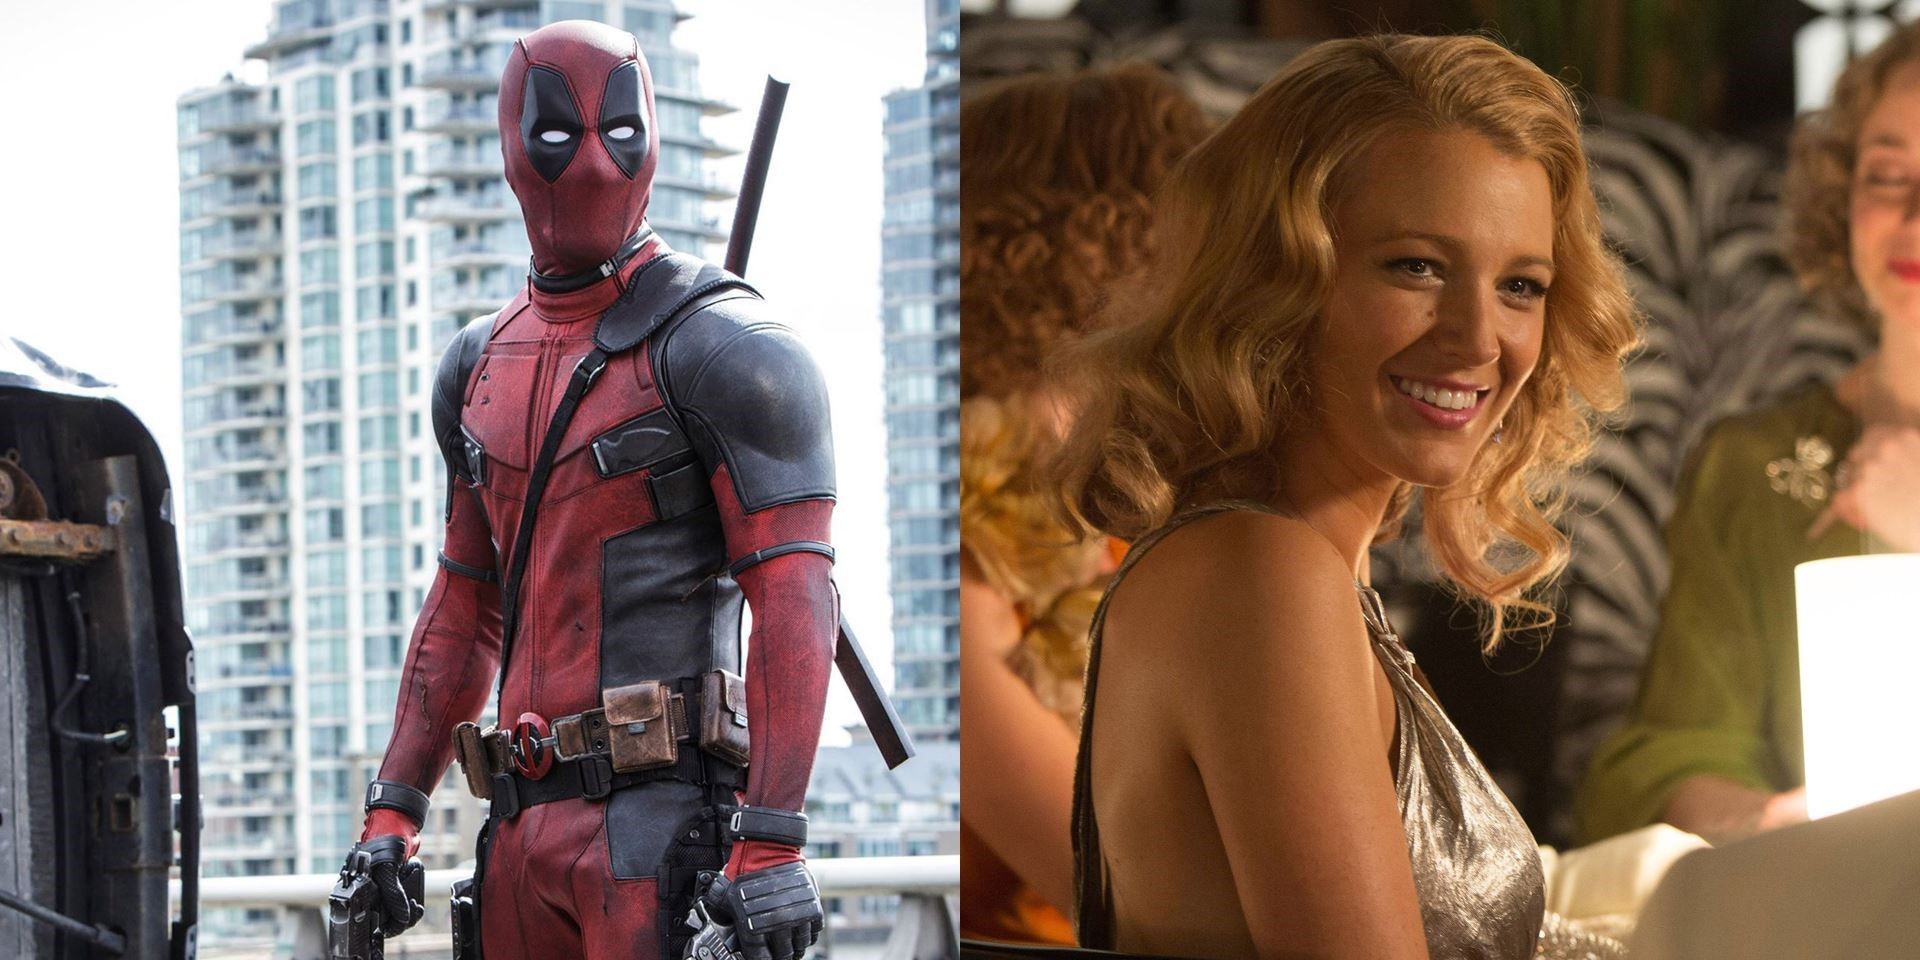 Ryan Reynolds & Blake Lively The Couples Five Best Films According To Rotten Tomatoes